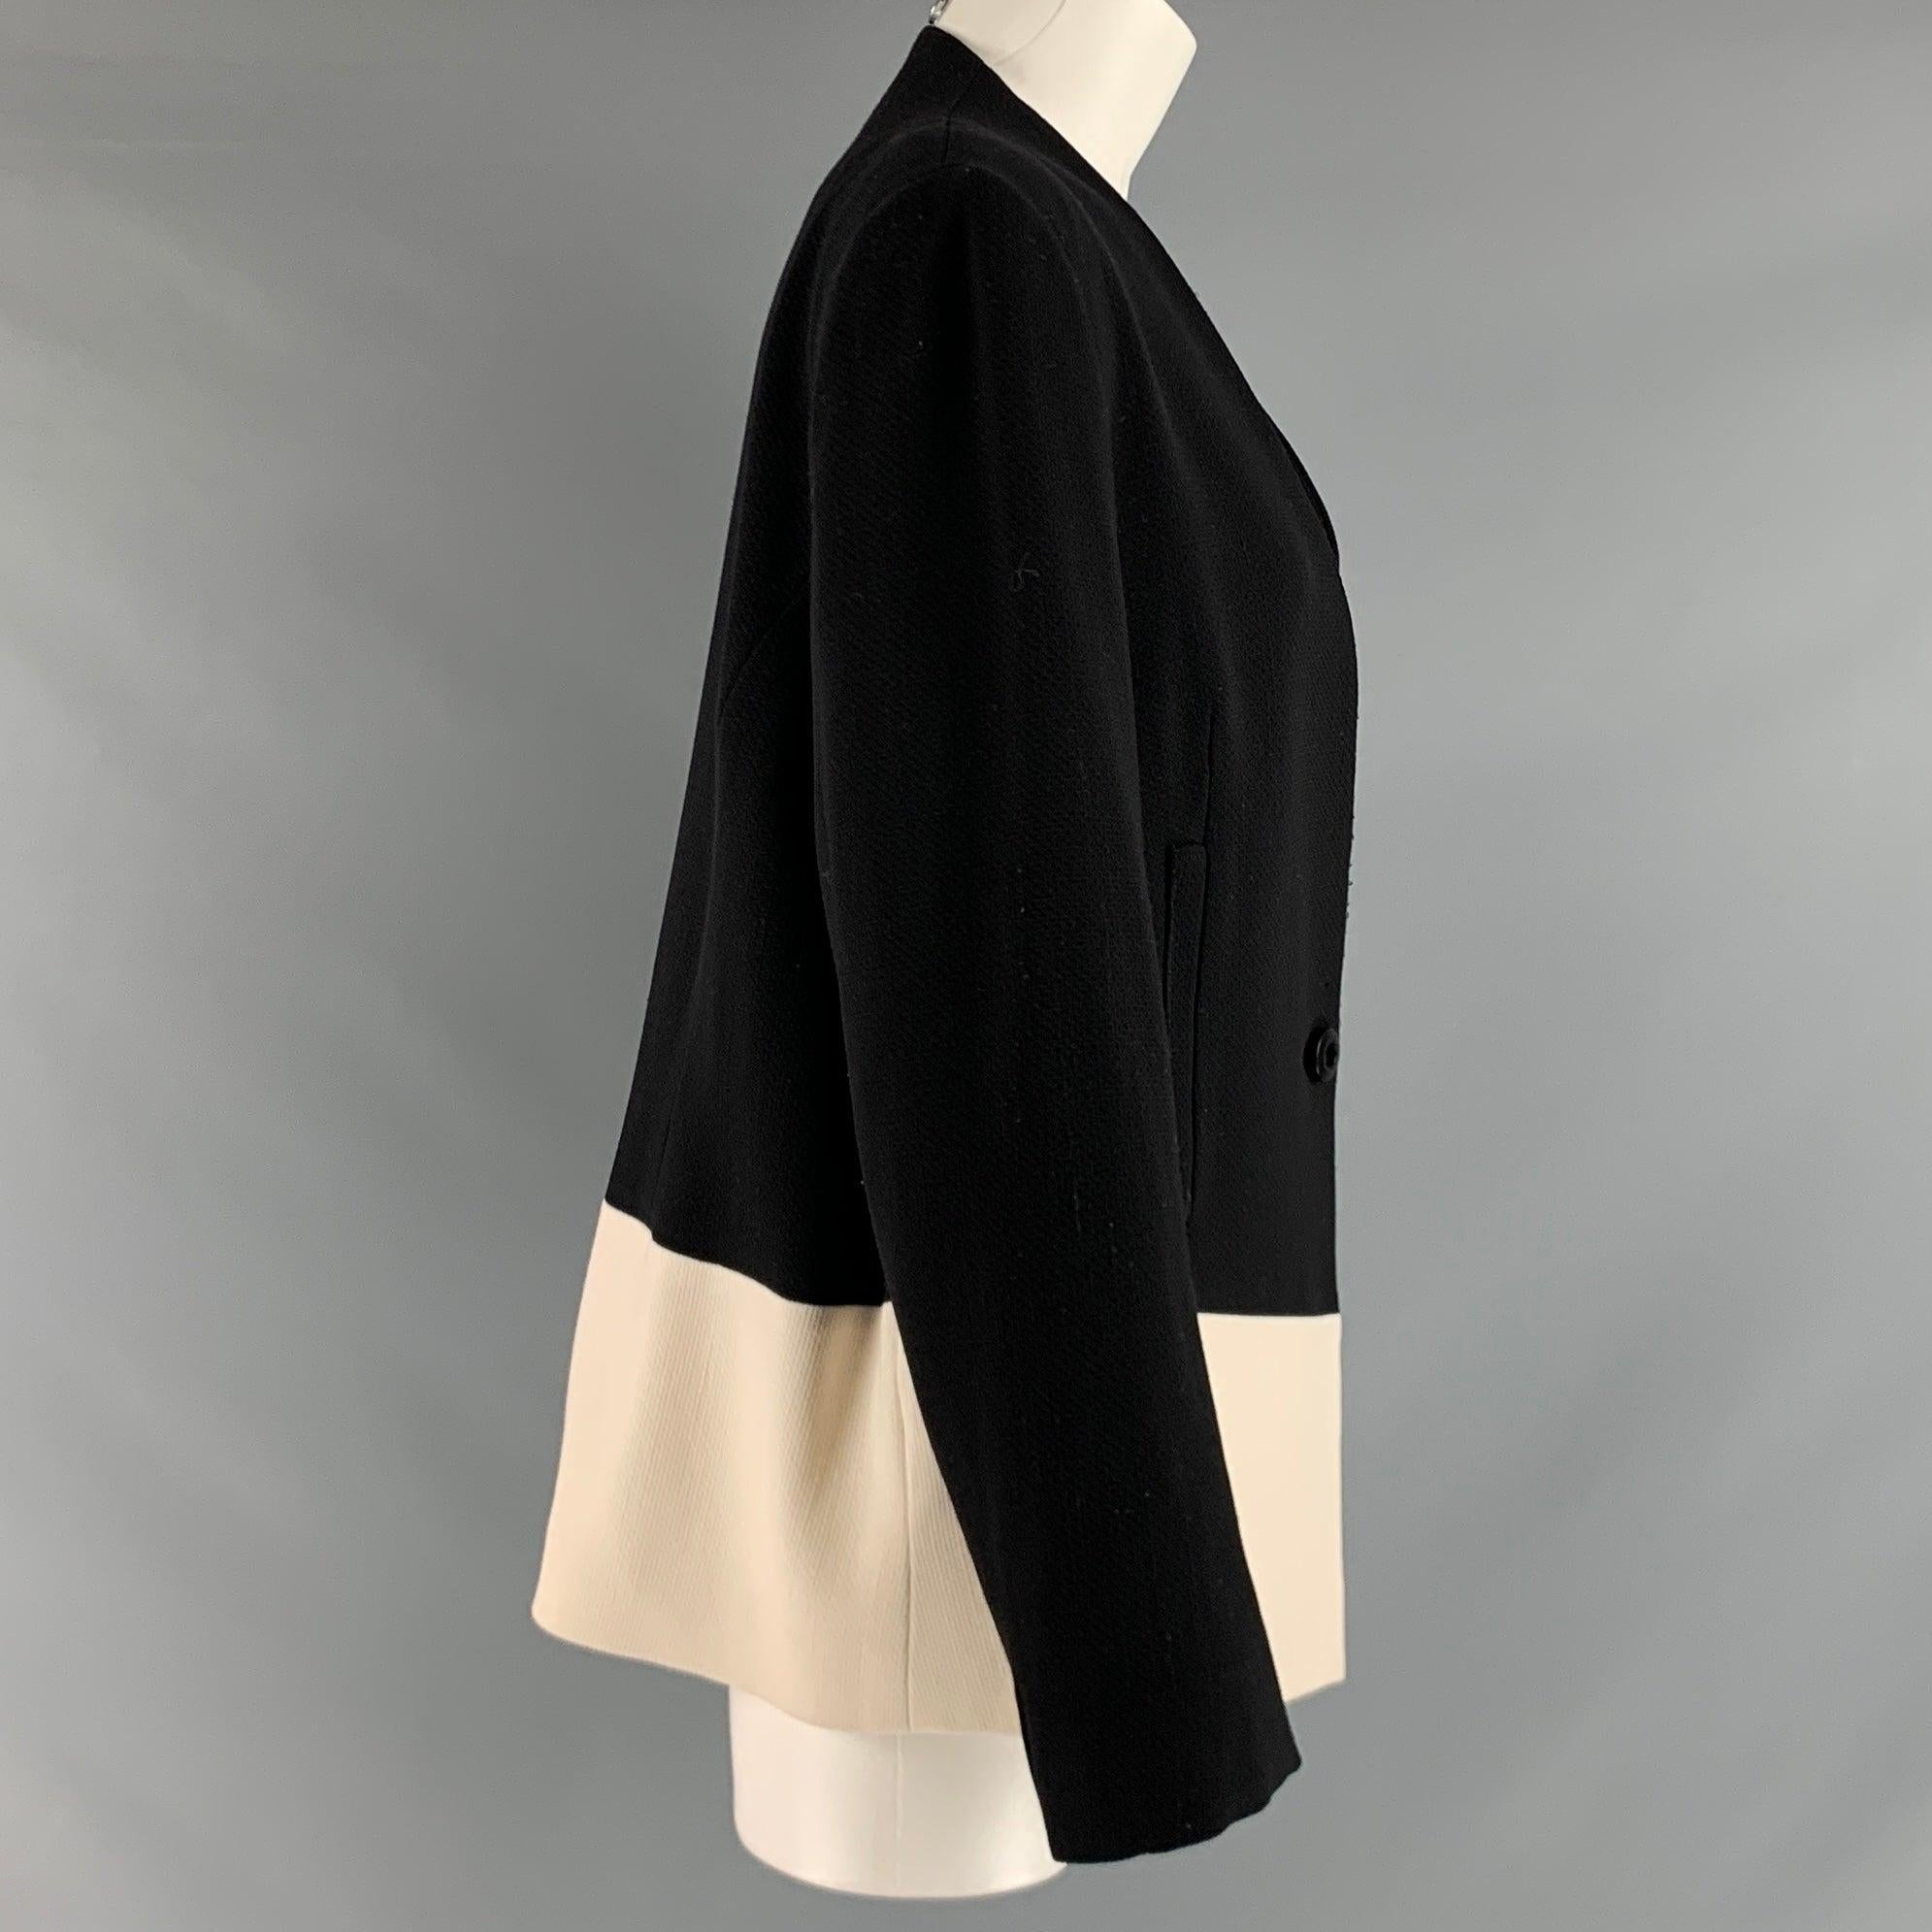 ESCADA blazer comes in black and cream wool blend knit material featuring a color block style, collarless design, and button closure.Very Good Pre-Owned Condition. Moderate signs of wear. 

Marked:   44 

Measurements: 
 
Shoulder: 17 inches Bust: